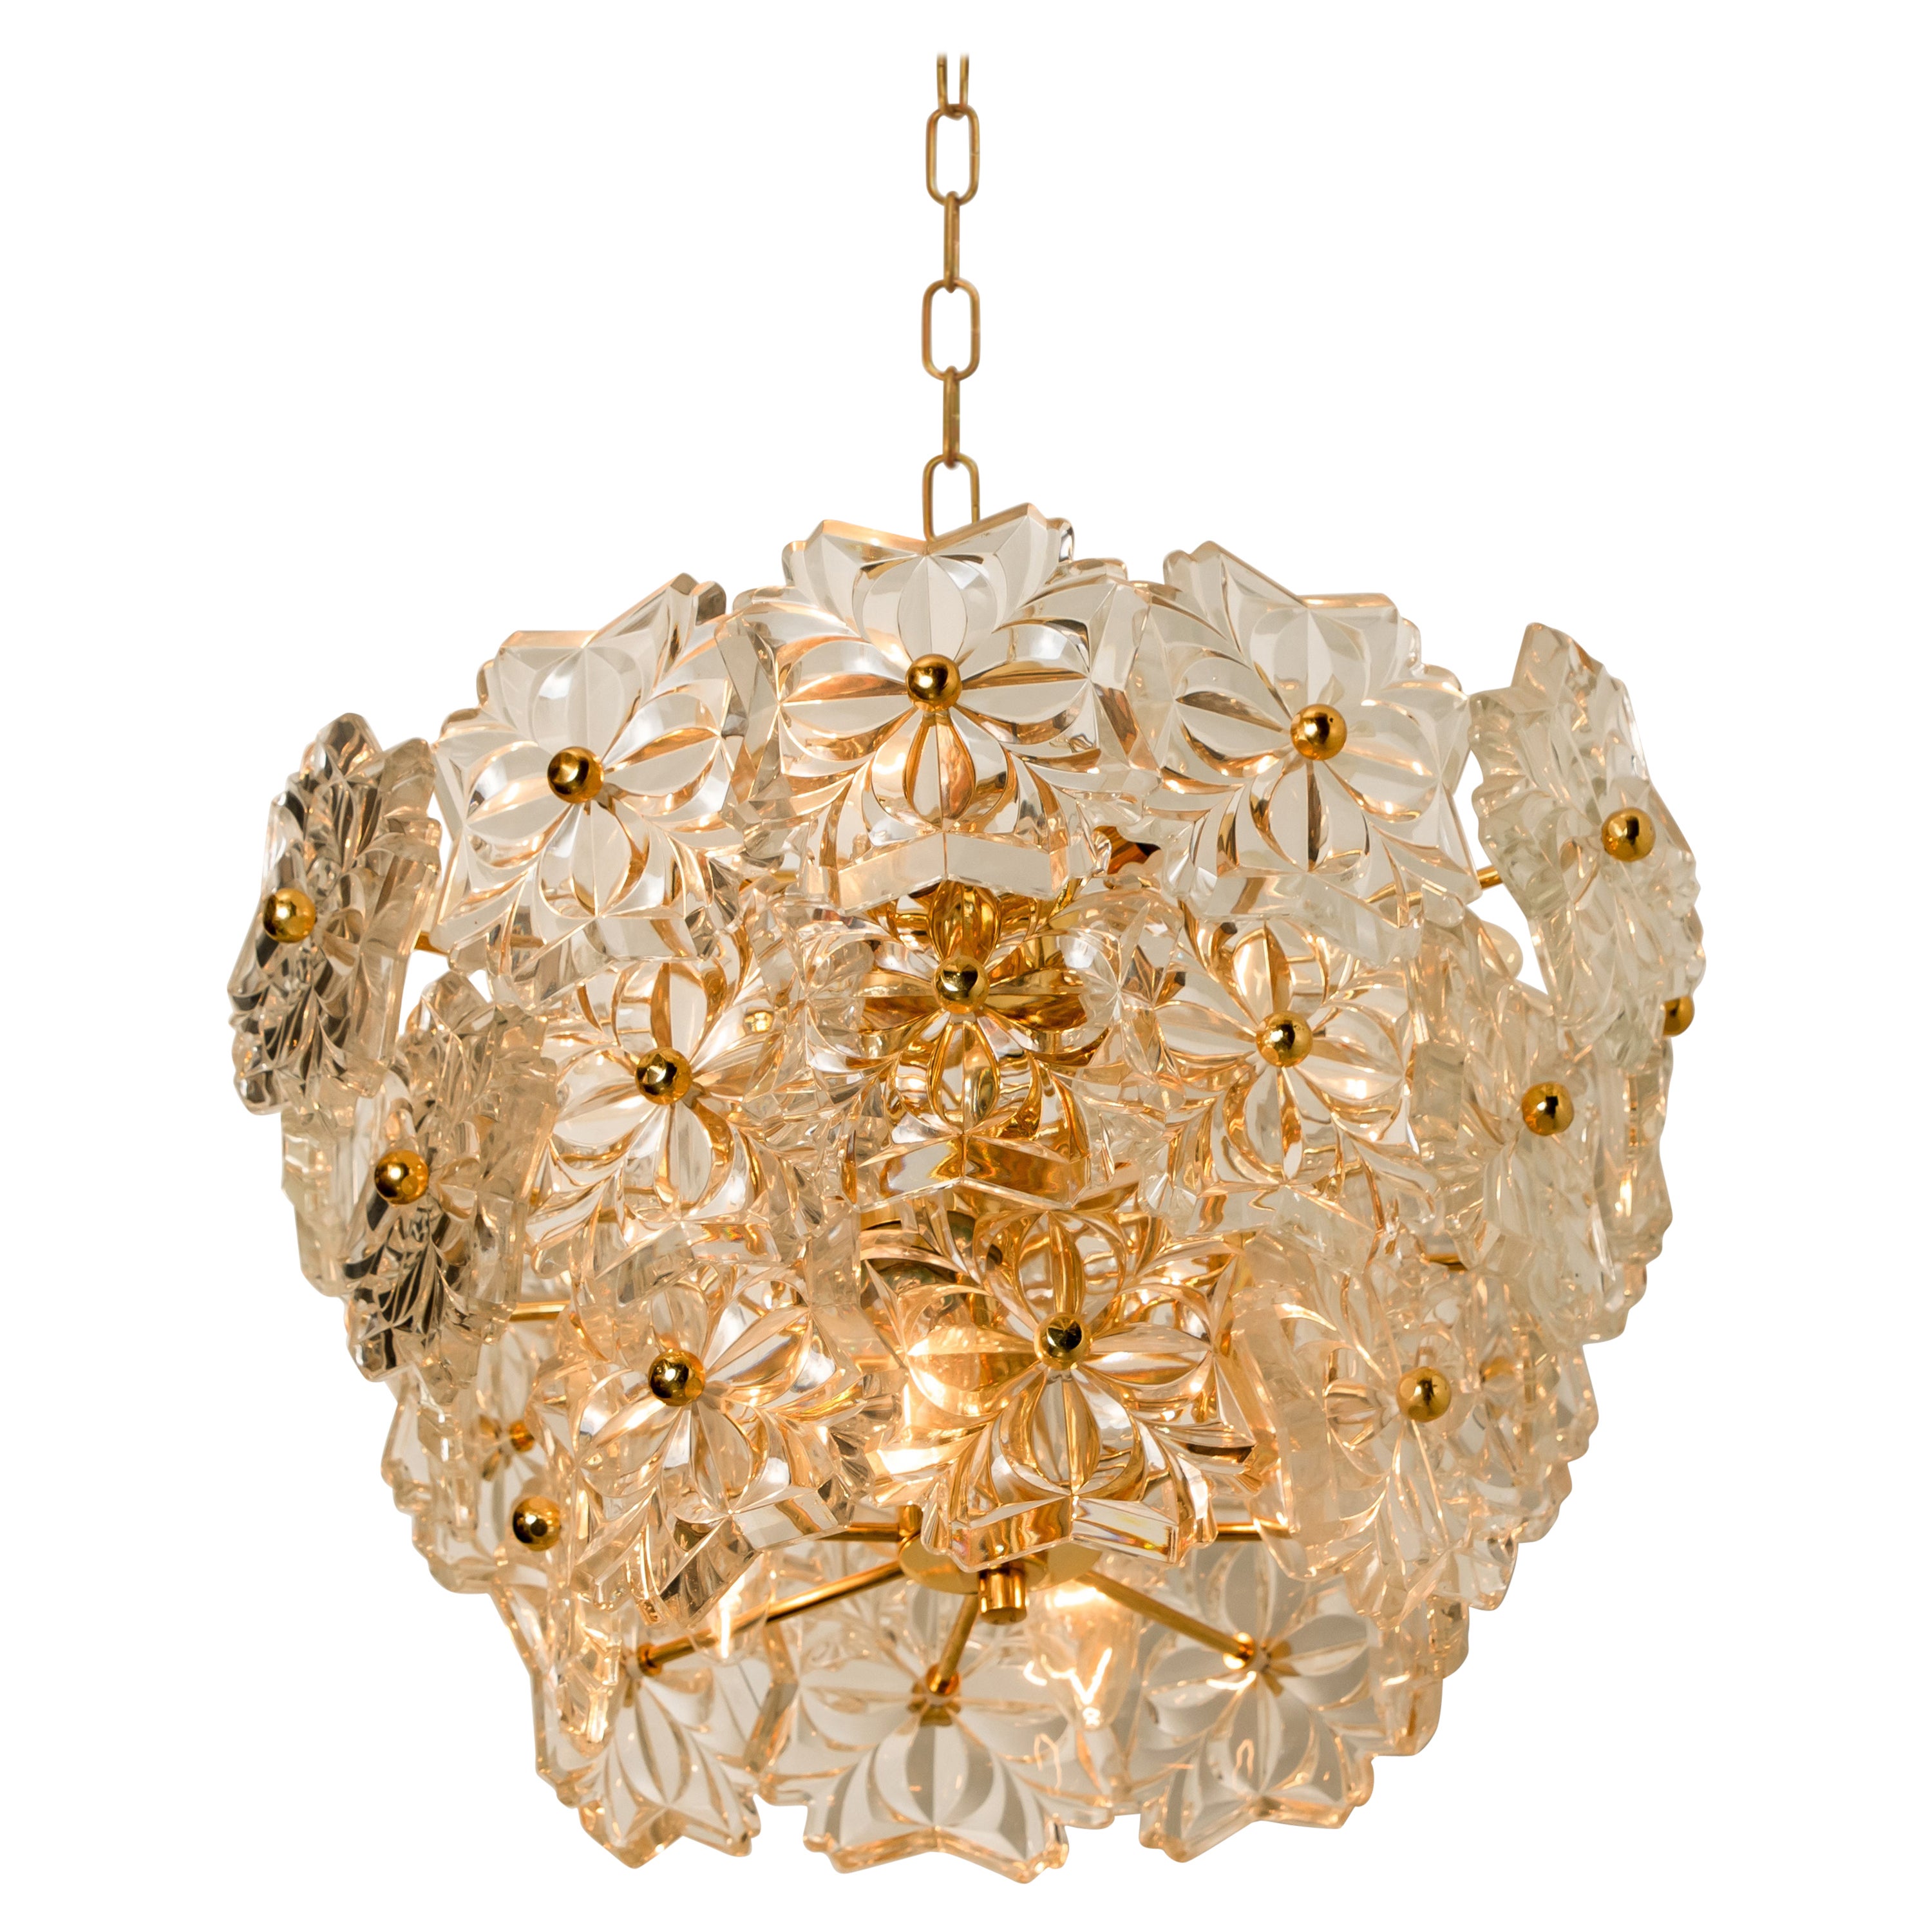 one f the two sculptural chandelier has the design of a bouquet of textured glass flowers and are from the historical lighting company Hillebrand, manufactured in midcentury, circa 1970 (late 1960s or early 1970s).

The fixture has several flower